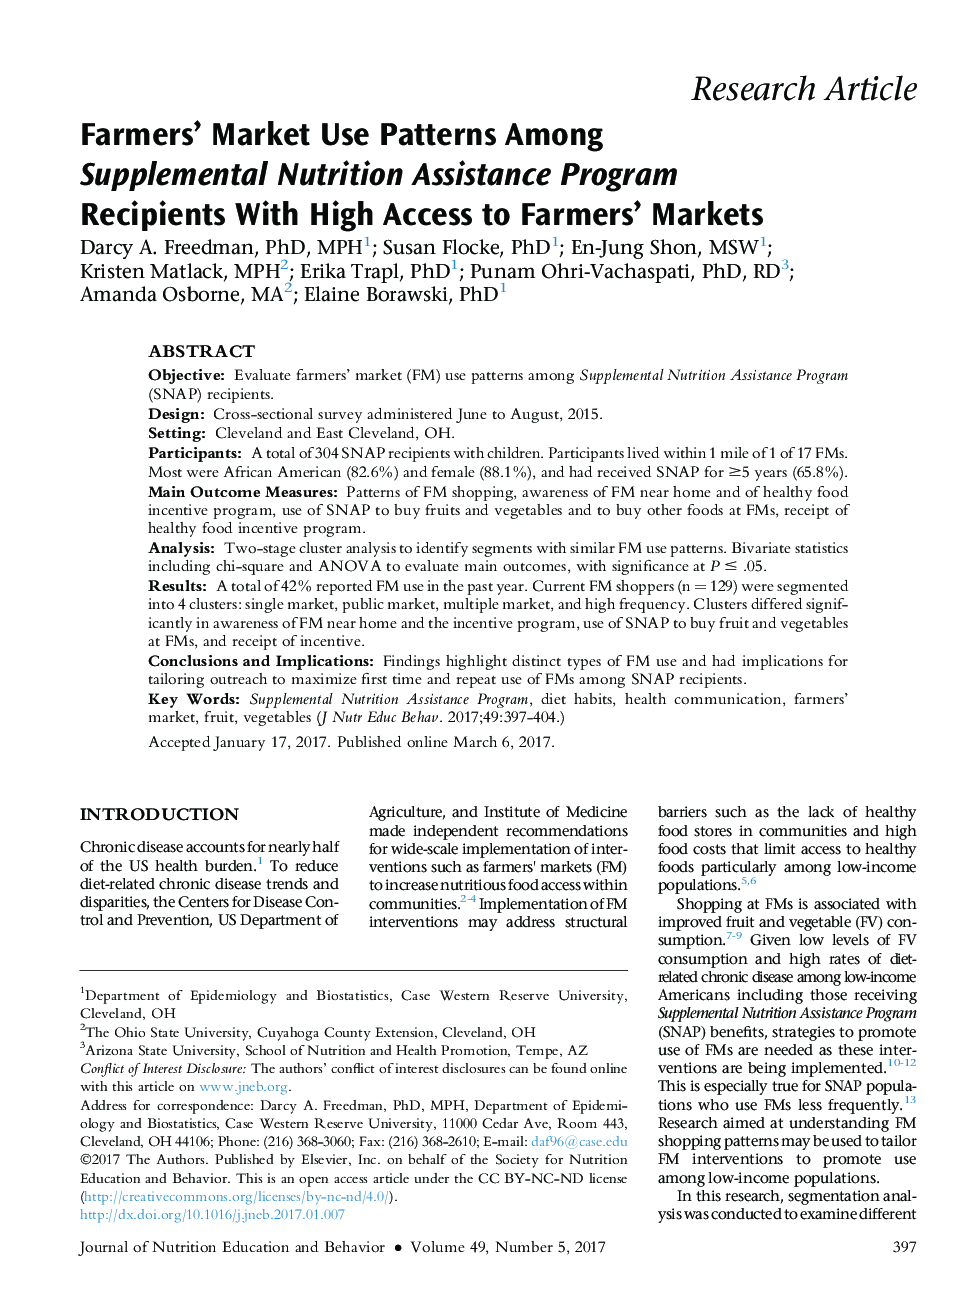 Farmers' Market Use Patterns Among Supplemental Nutrition Assistance Program Recipients With High Access to Farmers' Markets